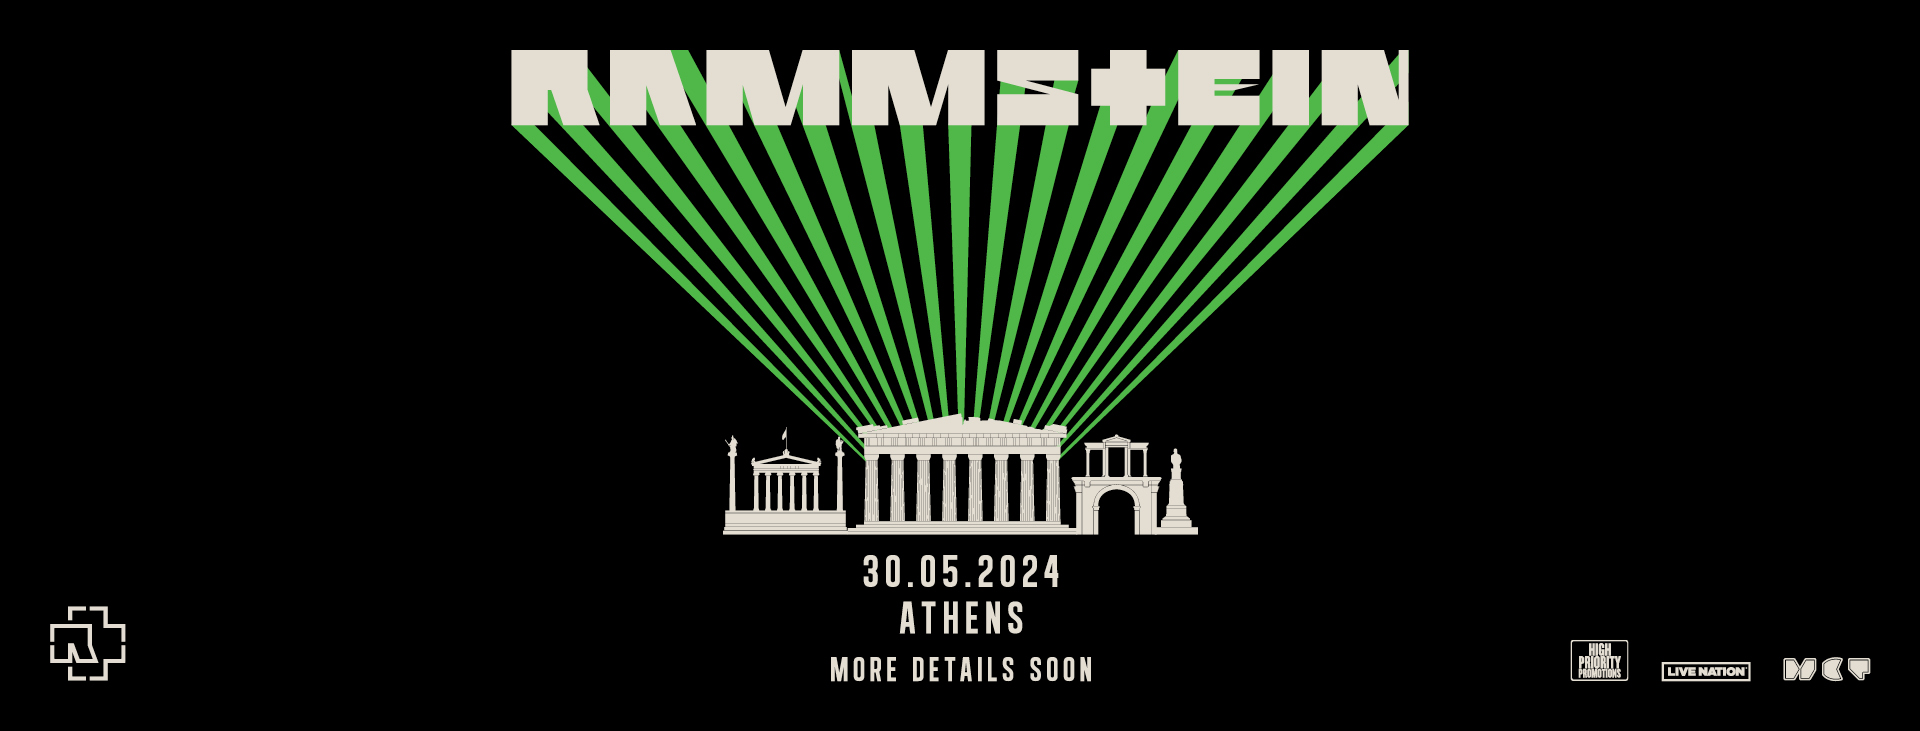 Rammstein live in Athens 2024